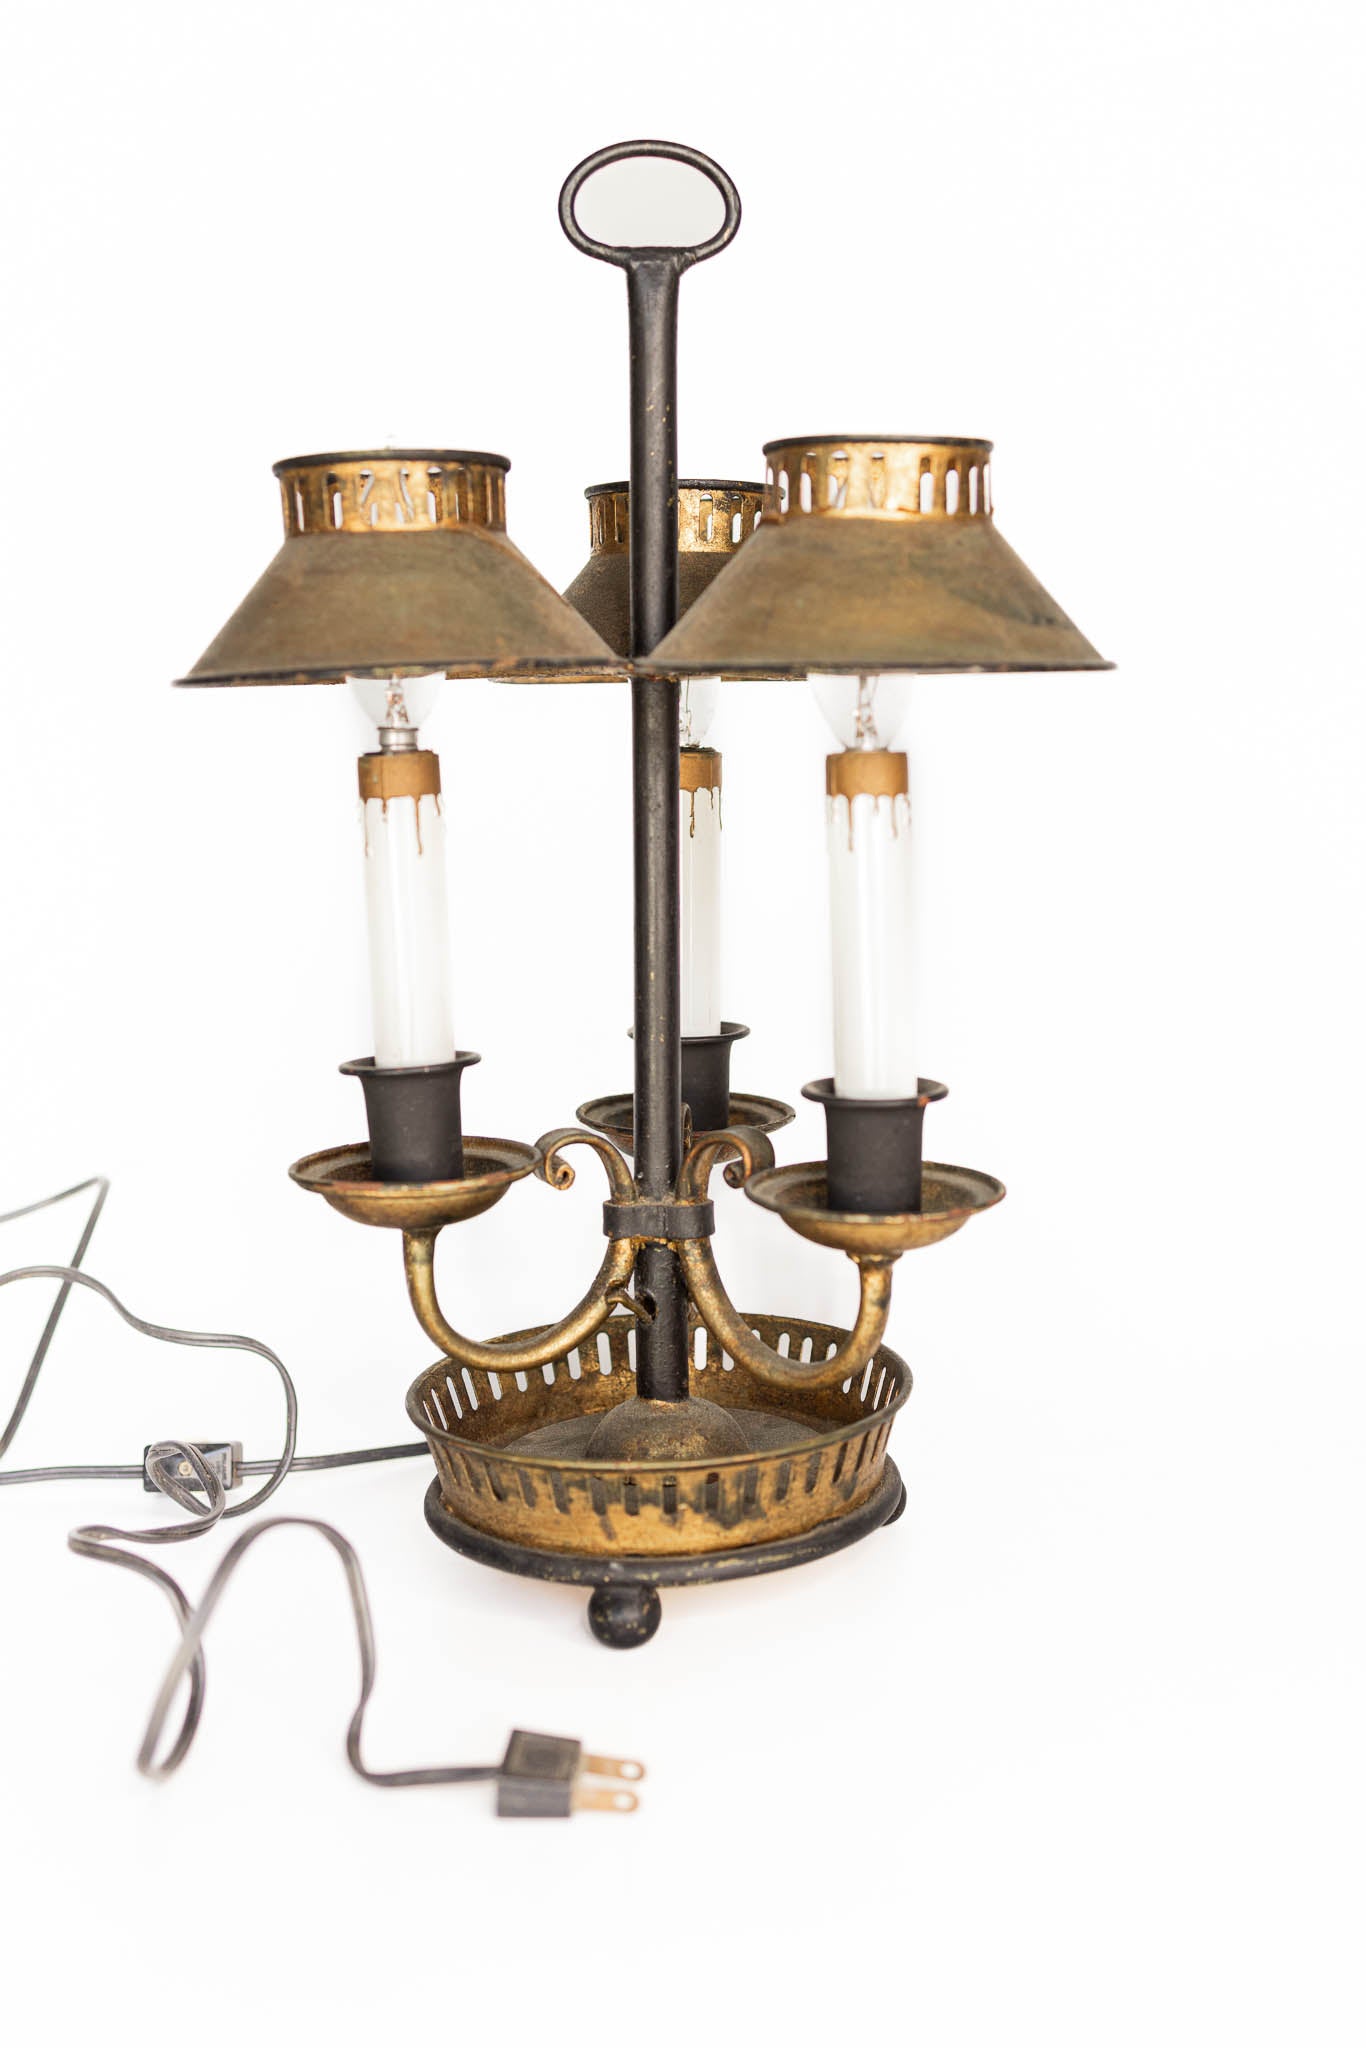 3 Prong Black & Gold Tole Lamp